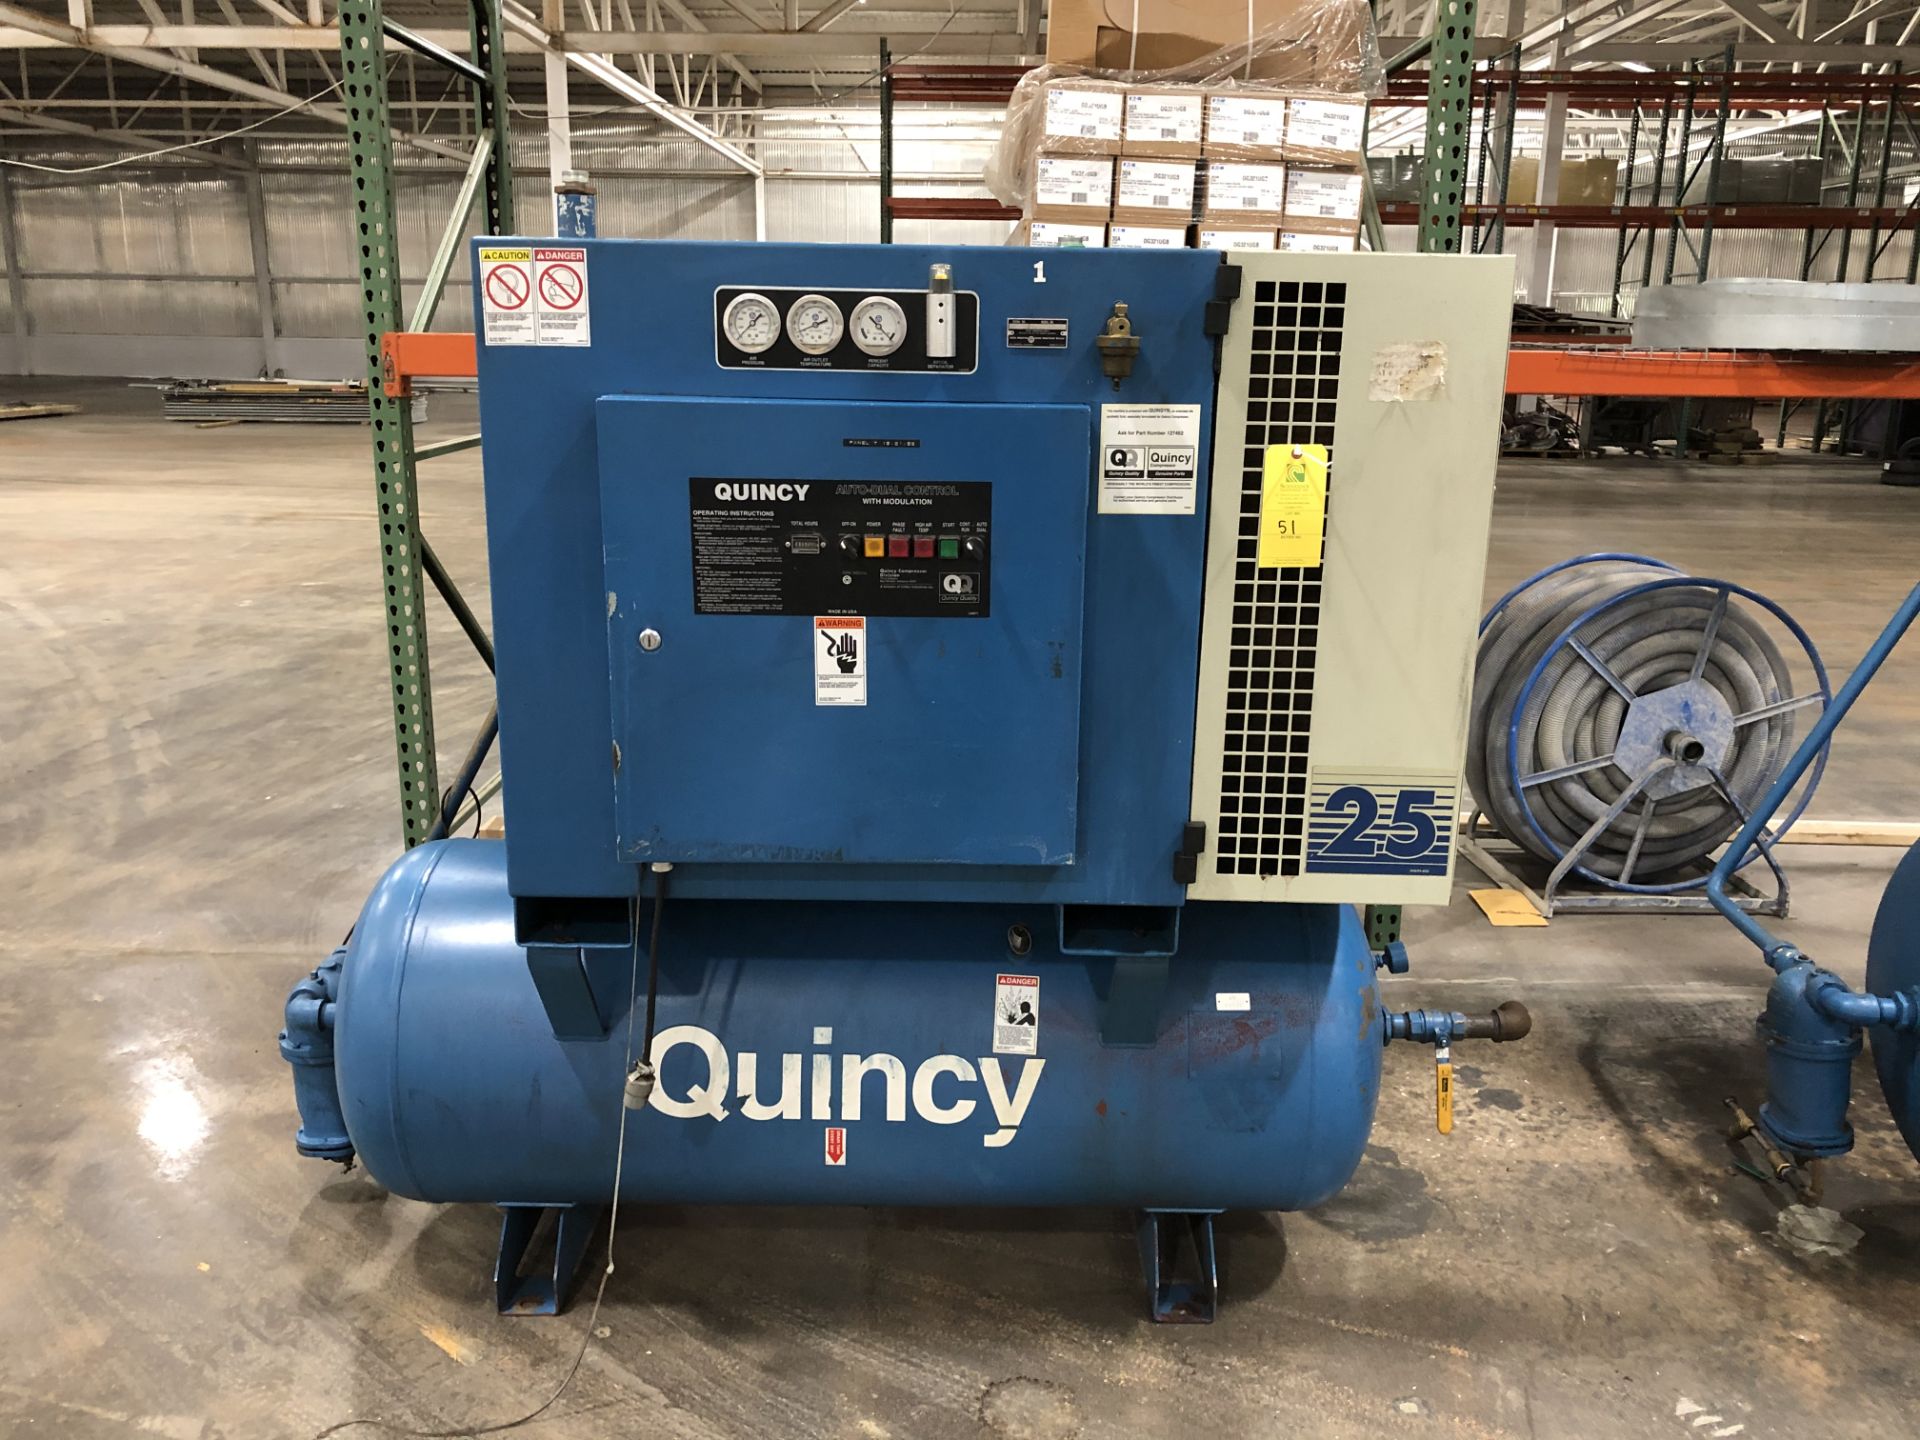 Quincy Air Compressor, 64,028.2 Hours, Rigging/ Loading Fee: $100